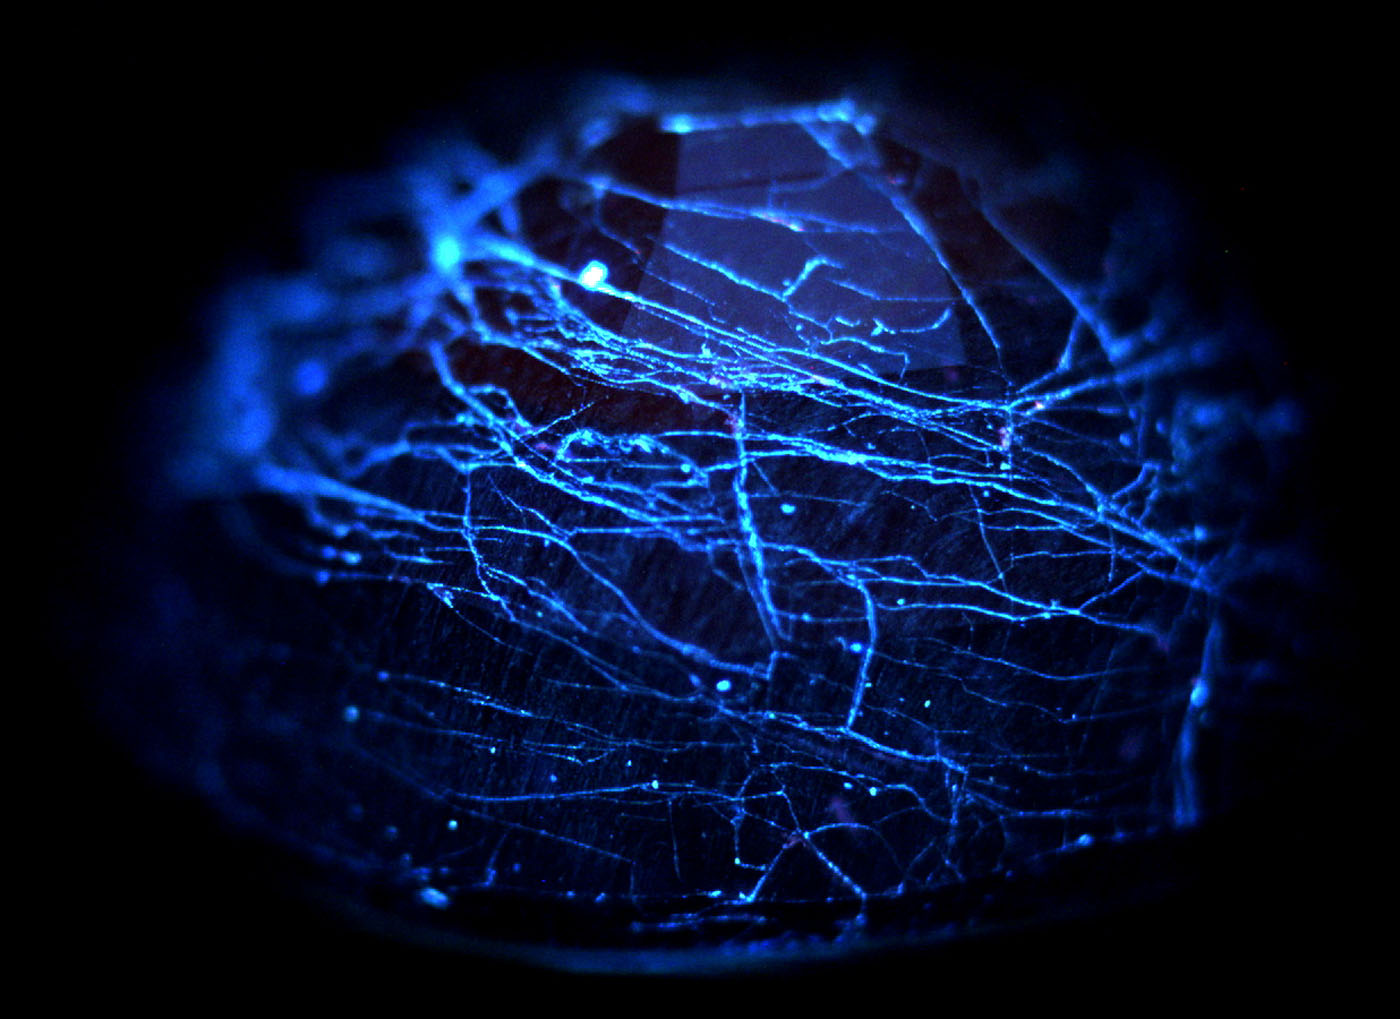 Figure 13. DiamondView™ image of a cobalt-doped glass-filled sapphire, showing chalky blue fluorescence from the glass-filled fissures. Image: GIT